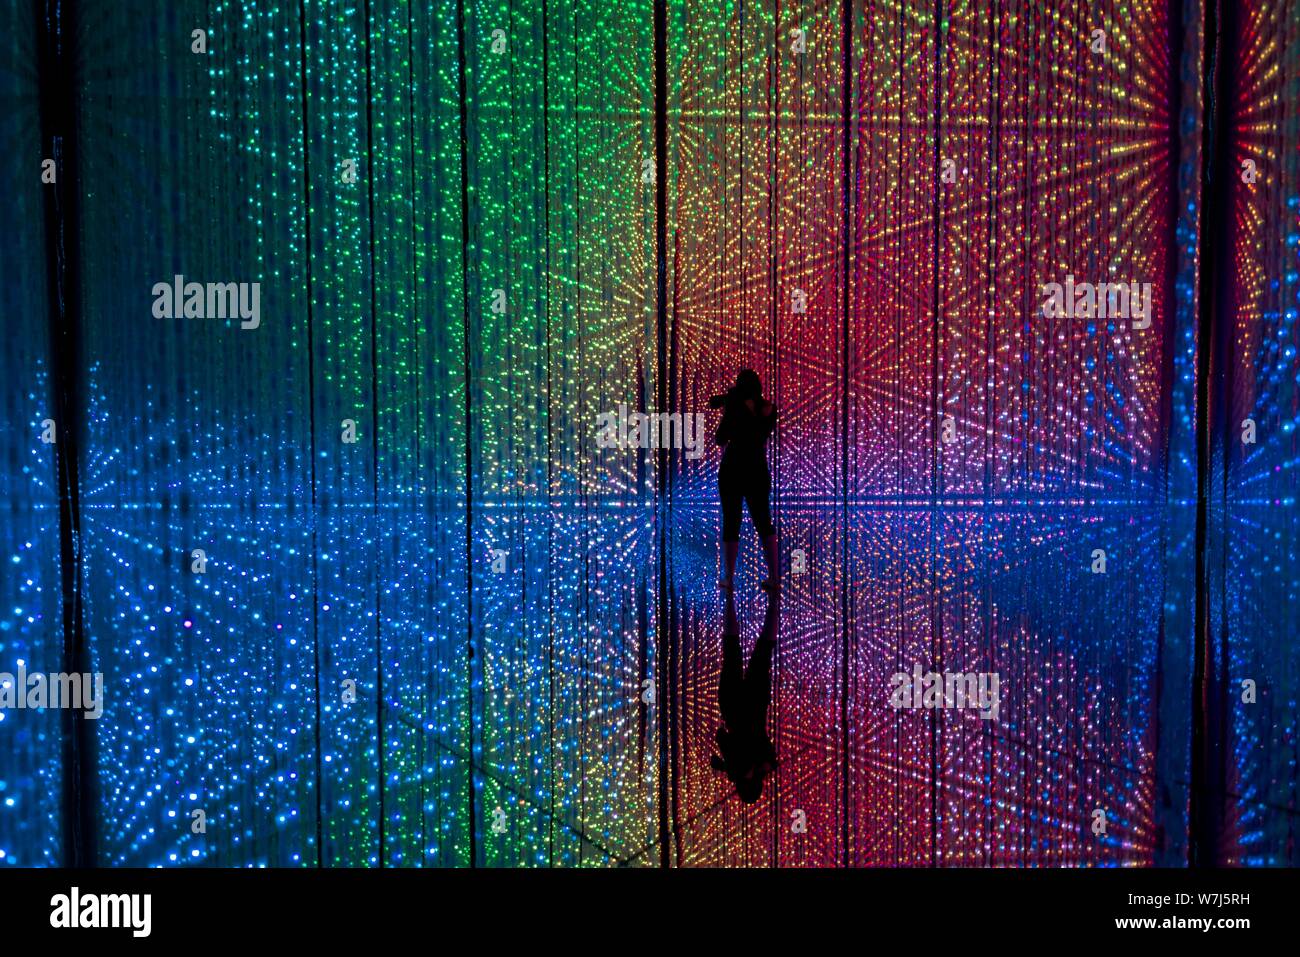 LED installation, visitor at the Digital Art Museum, TeamLab Planets, Koto City, Tokyo, Japan, Asia Stock Photo